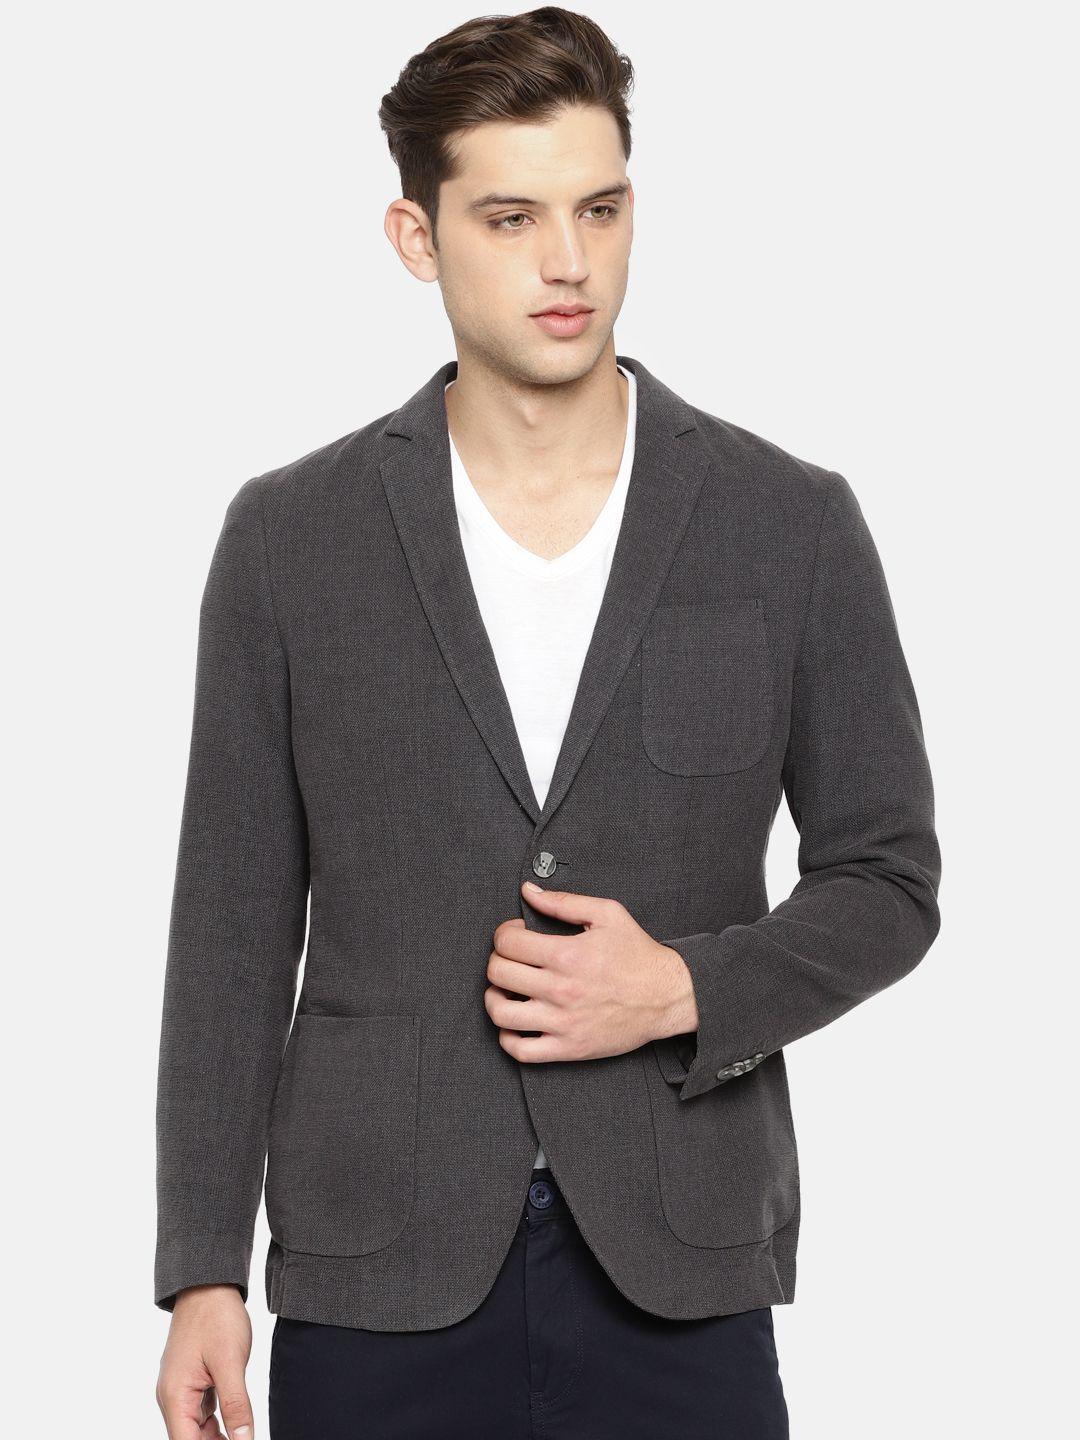 u.s. polo assn. charcoal grey solid single-breasted regular fit casual blazer